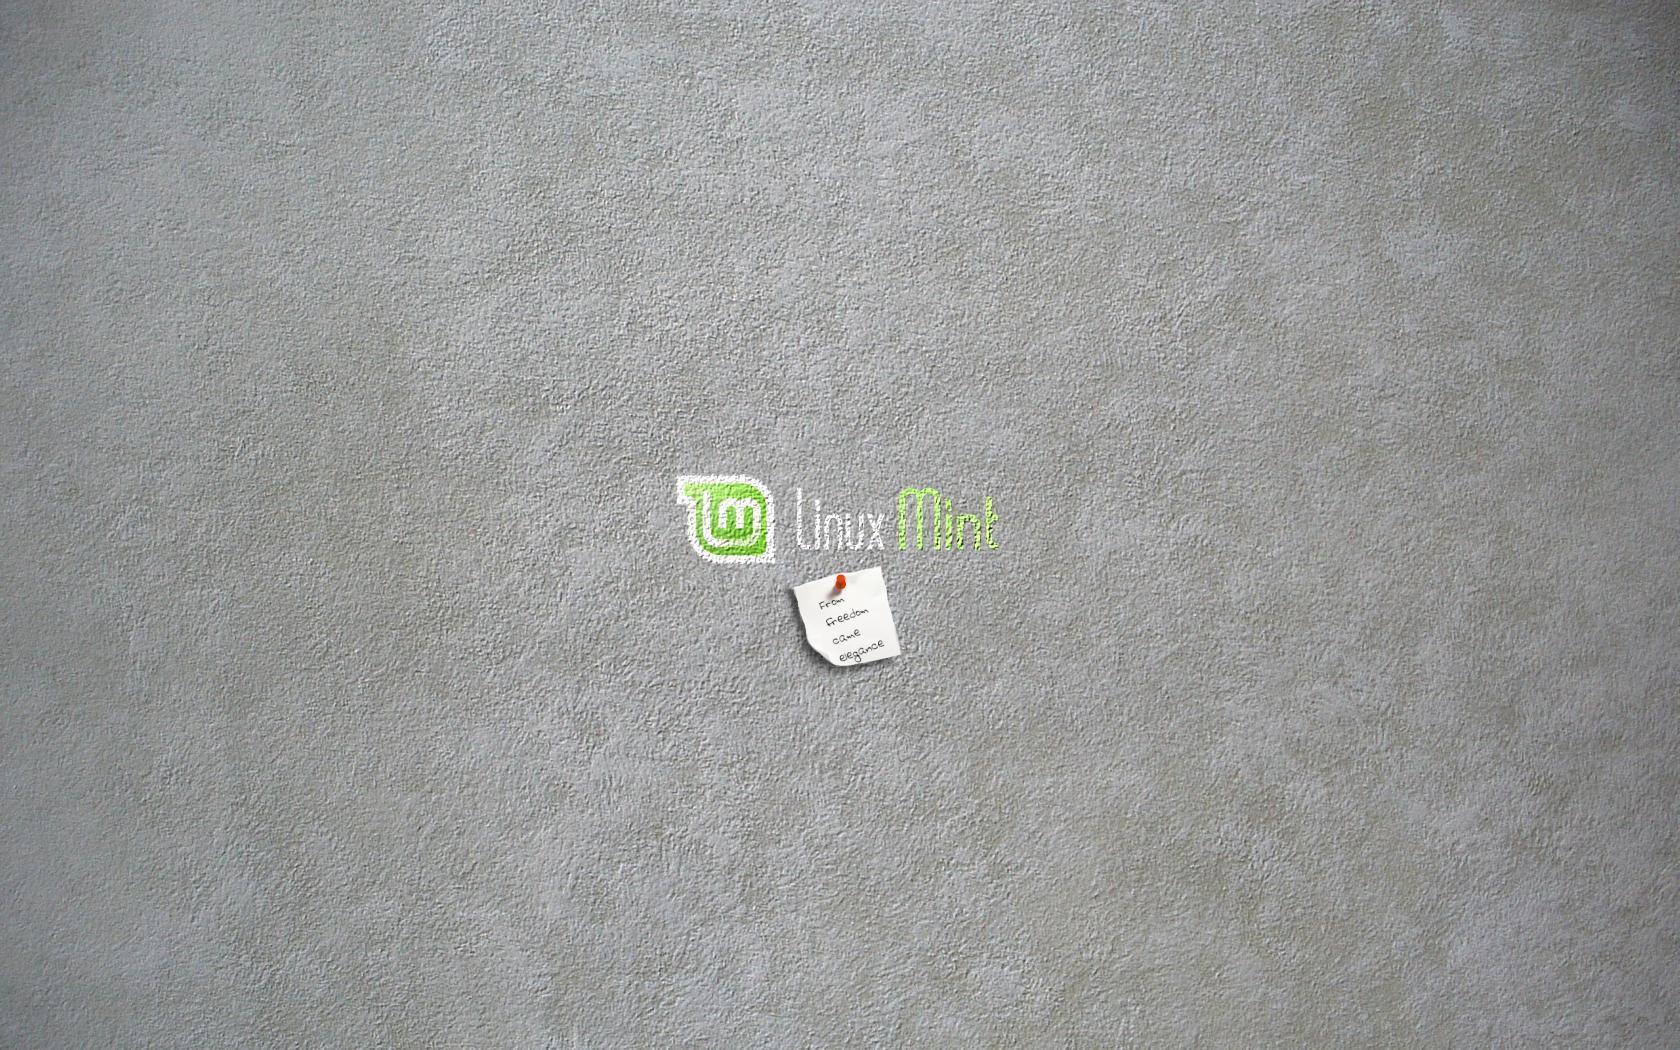 Linux Mint Forums • View topic 2 new wallpaper